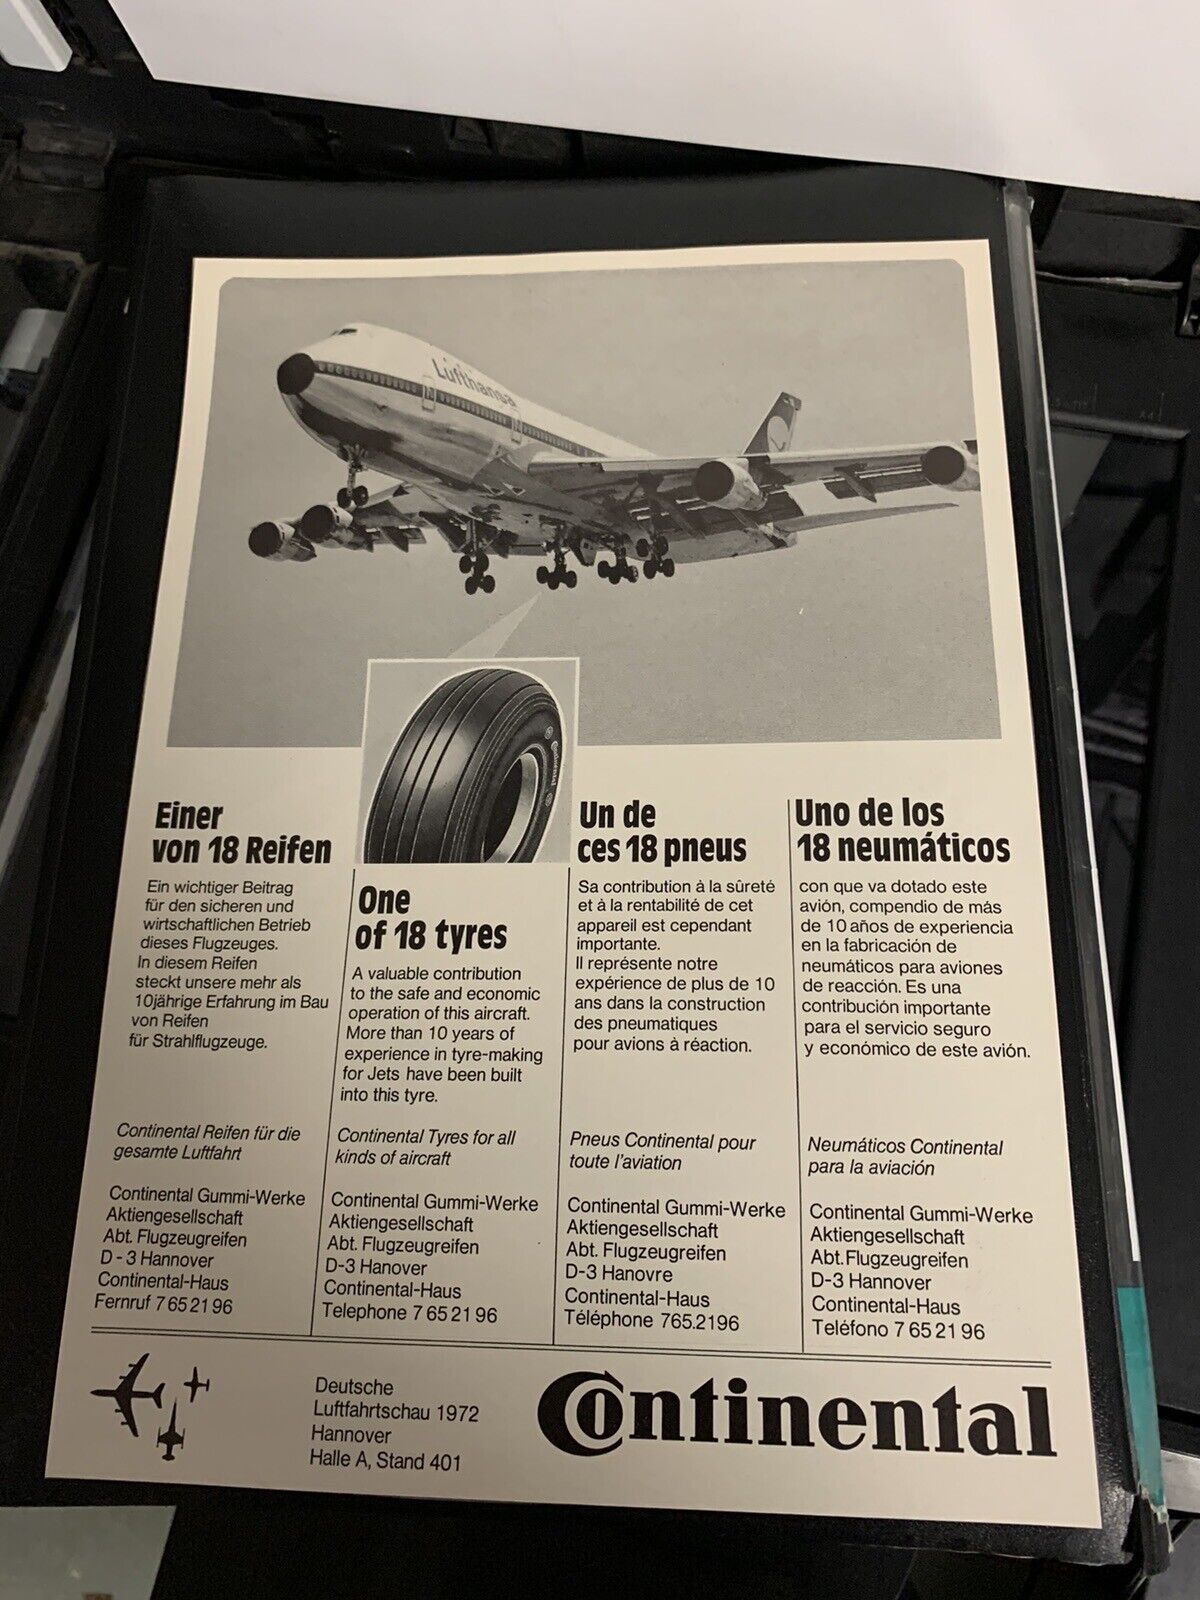 LUFTHANSA GERMAN AIRLINES BOEING 747-200 1972 Continental Tires Spanish Ad